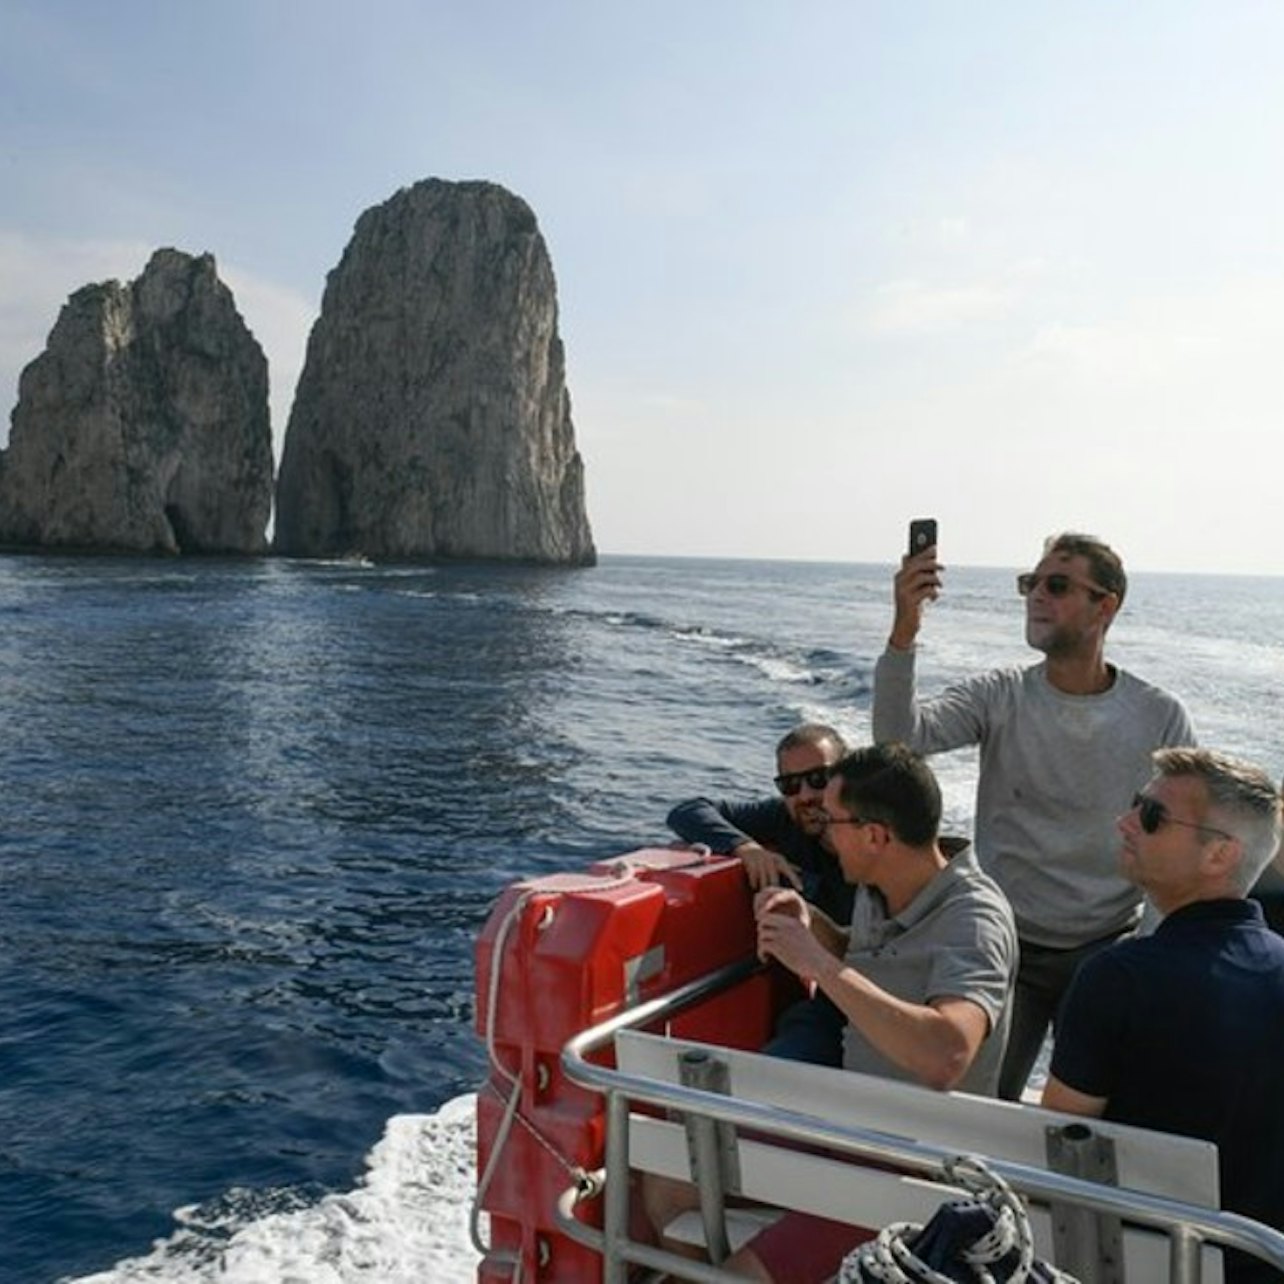 Capri Island: Day trip from Naples with Island Boat Tour - Accommodations in Naples